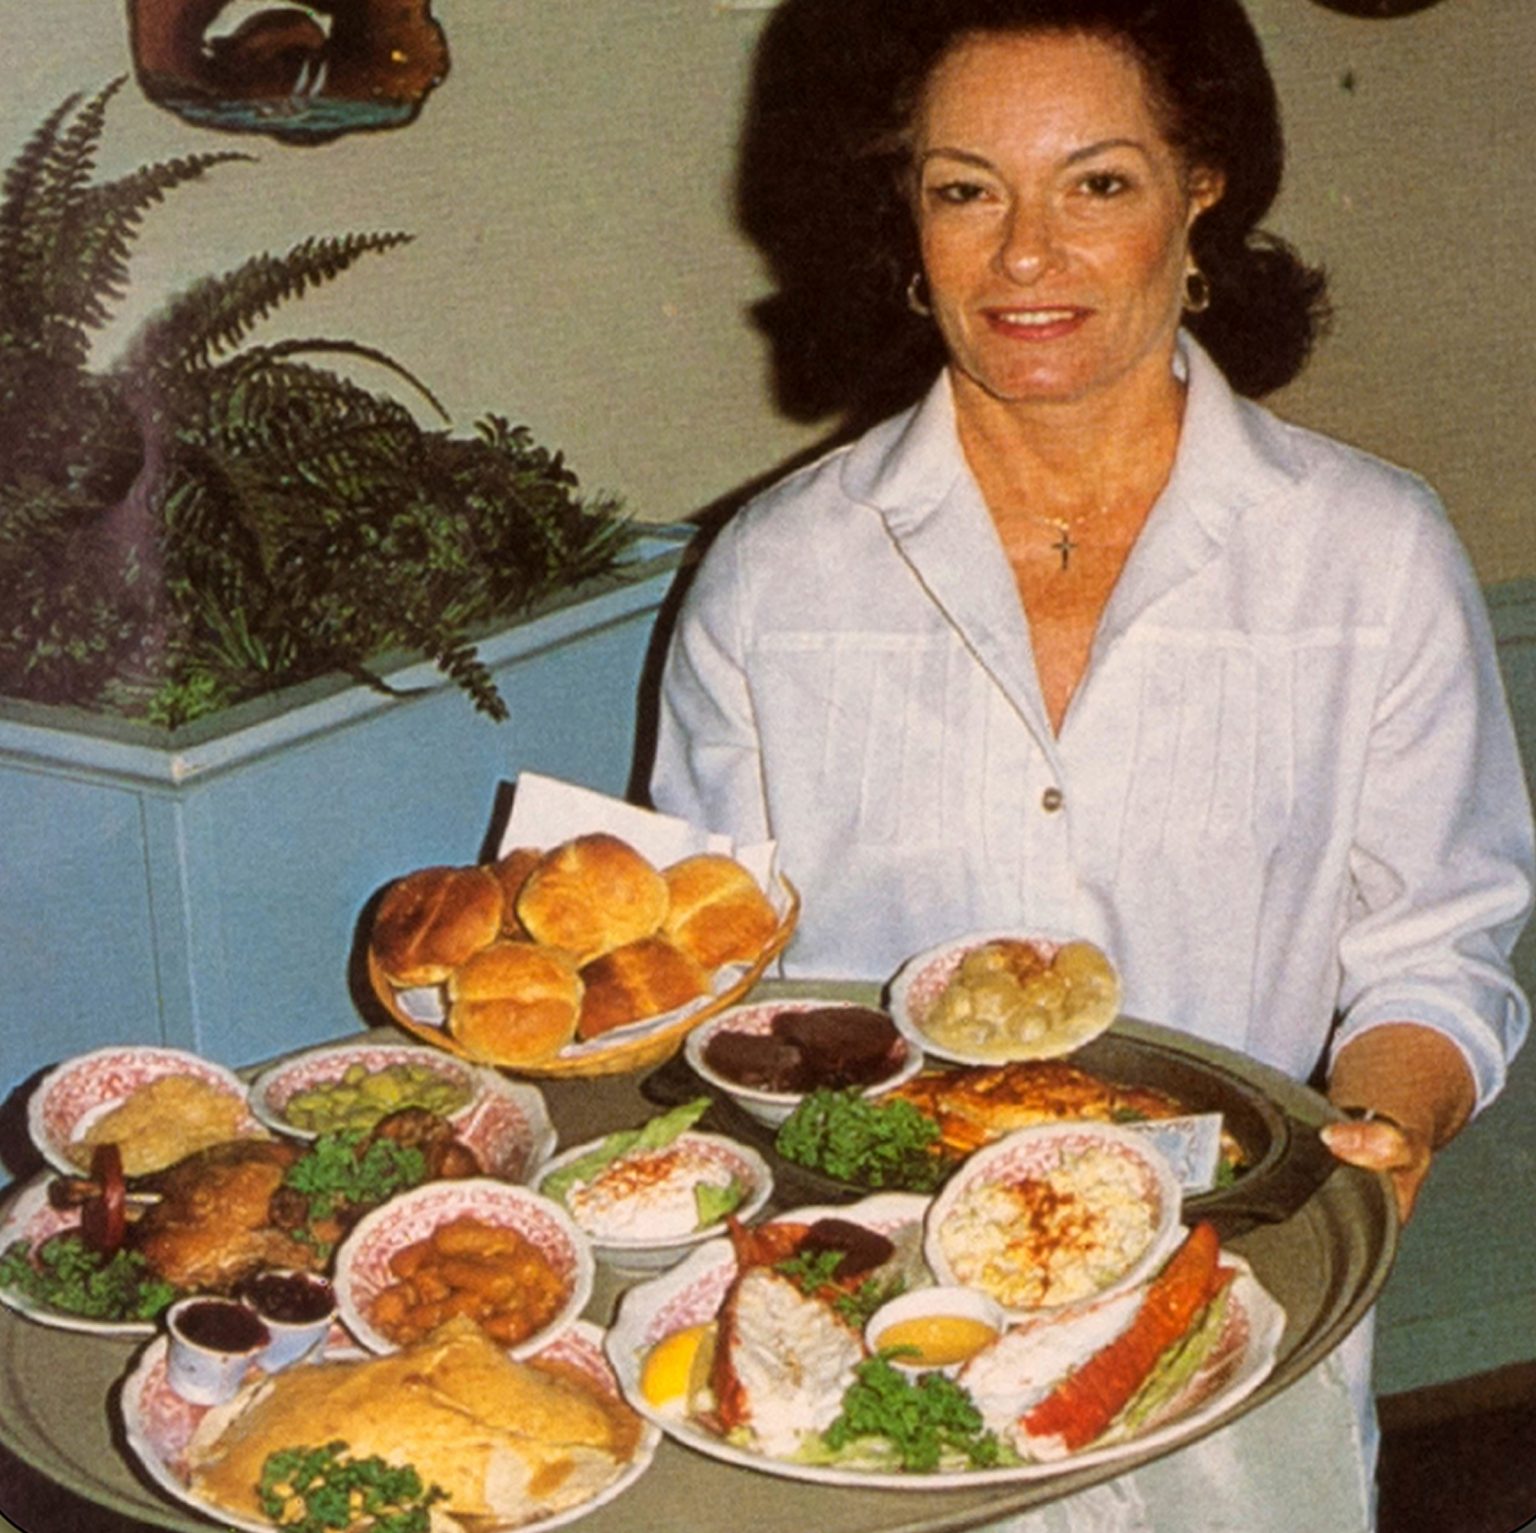 waitress with tray of food, 1970s or 80s